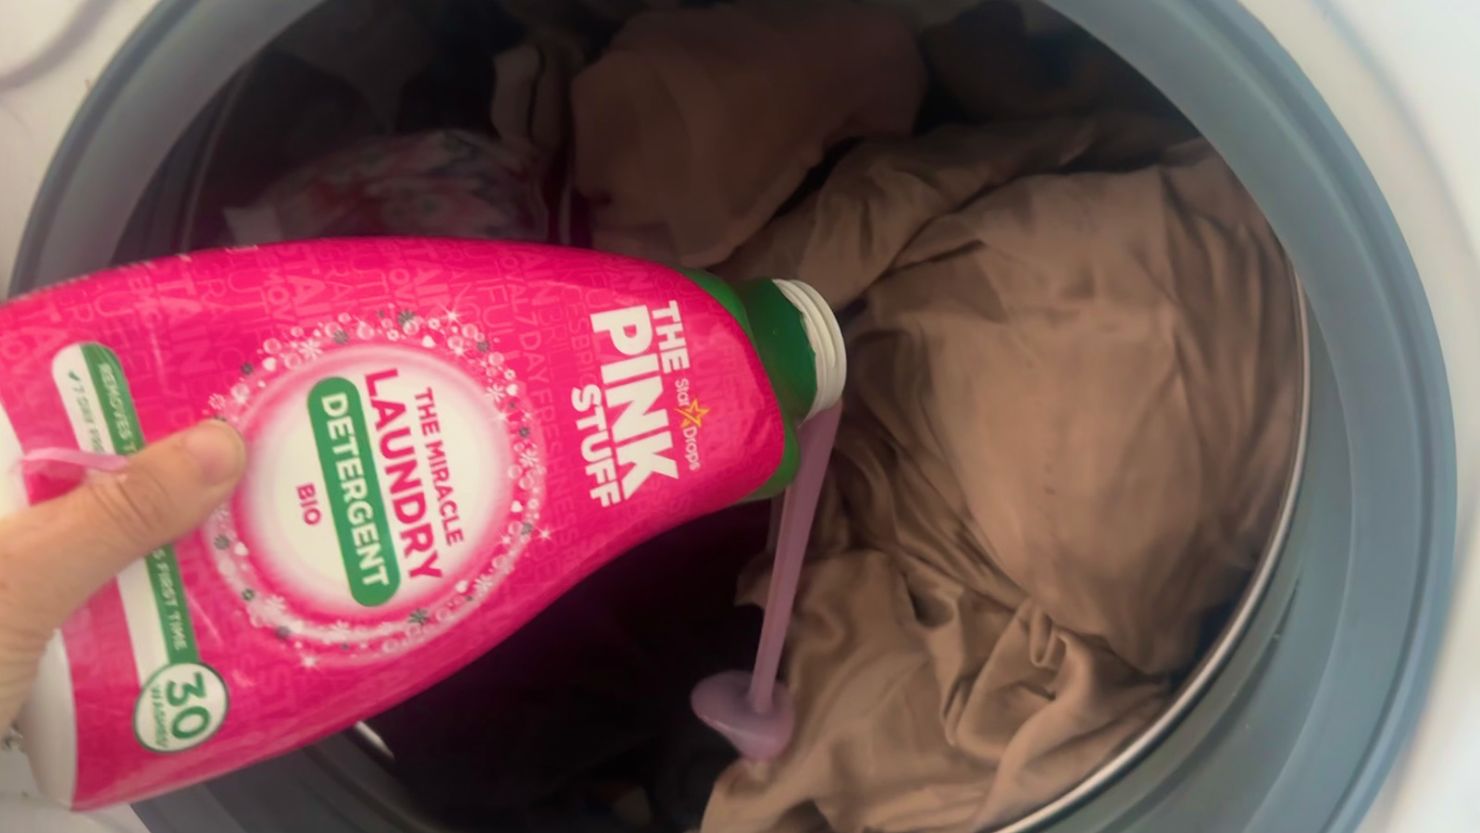 The Pink Stuff cleaning product: How to buy it in Australia